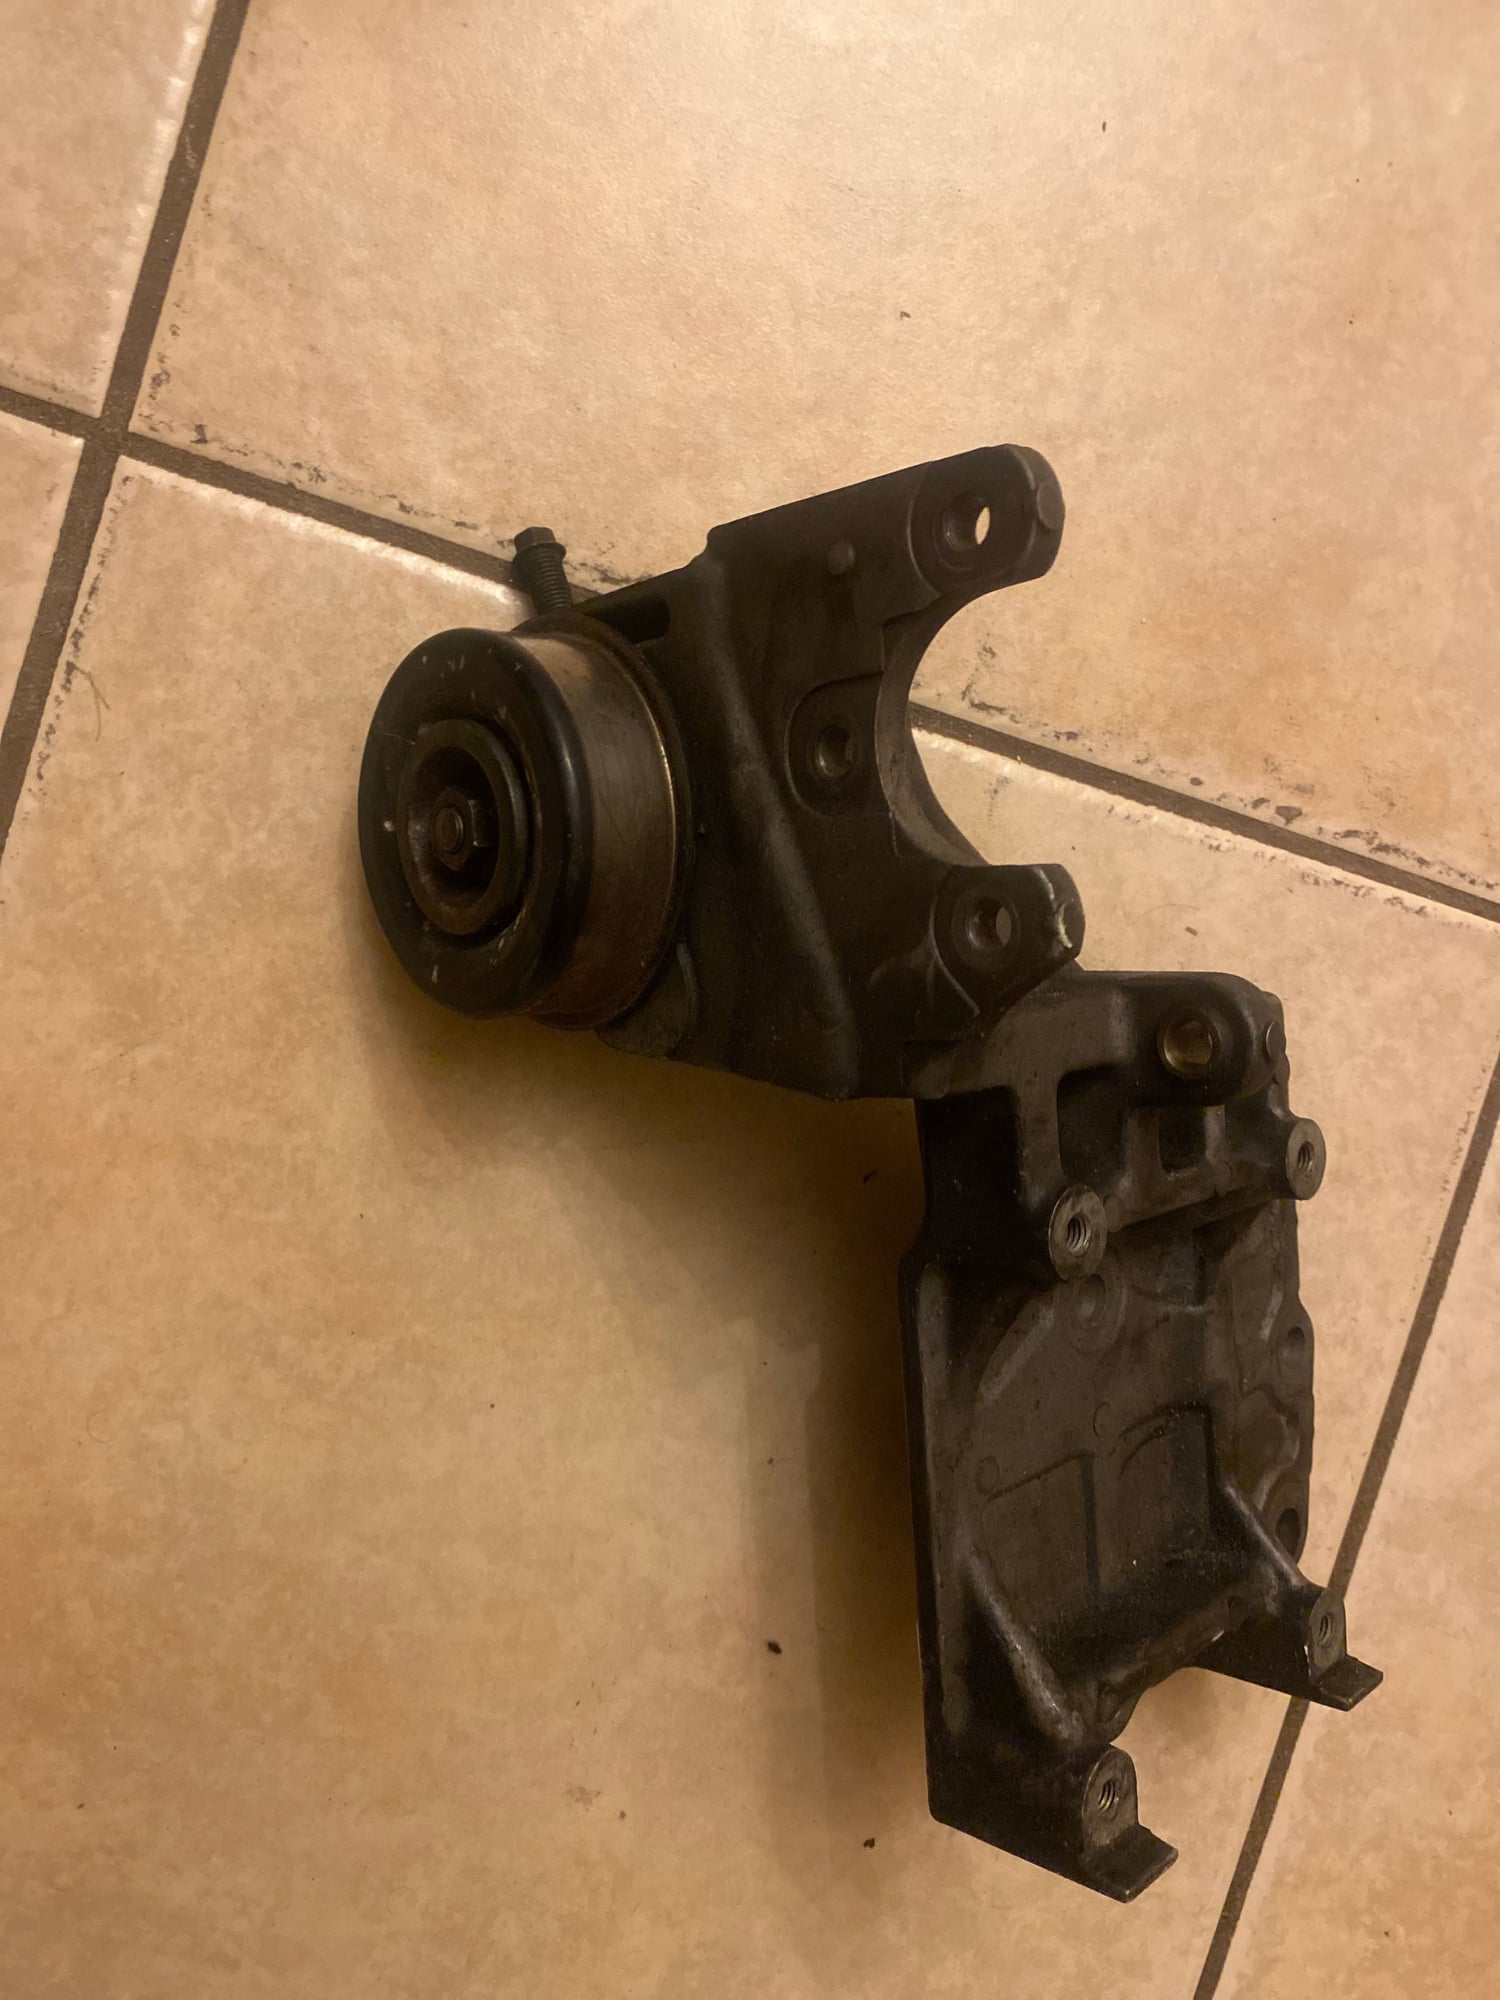 Miscellaneous - Fd rx7 ac power steering bracket - Used - 1993 to 2002 Mazda RX-7 - Miami, FL 33173, United States